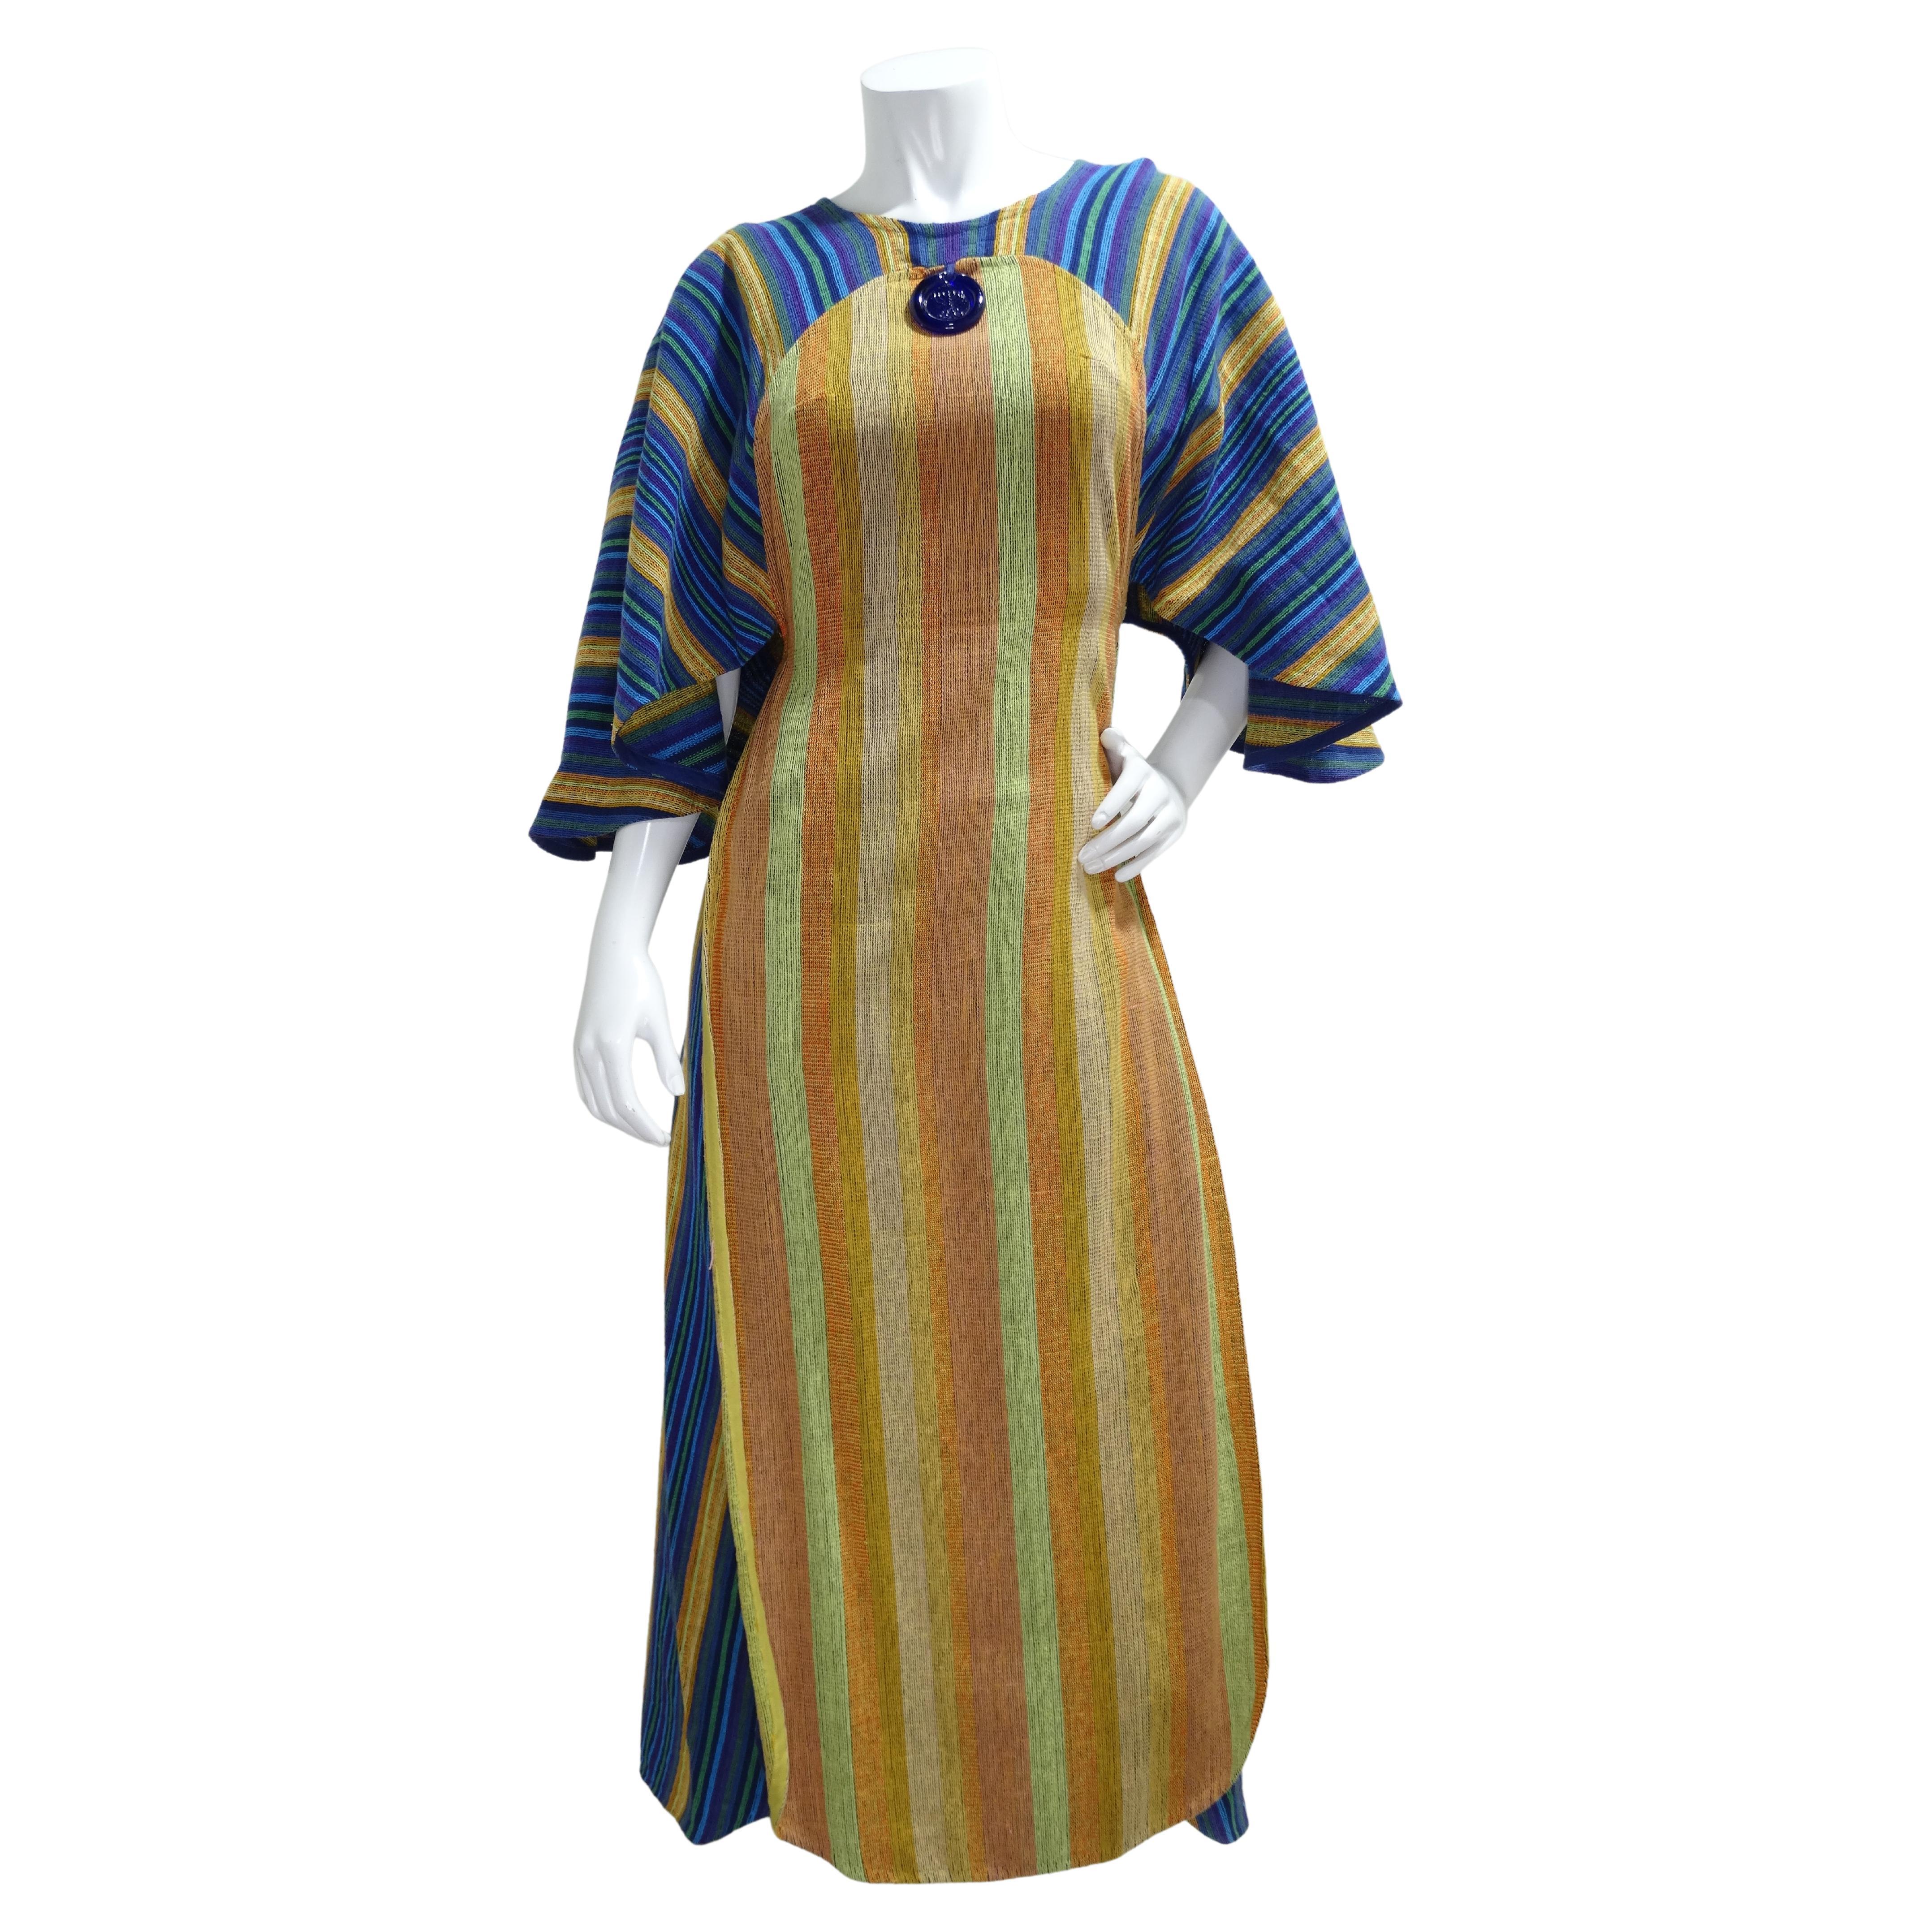 The beautiful details of this Rikma dress will have you hooked. This dress features a high-neck, maxi length, billowy sleeves, pendant depicting a Hanukkah menorah, color-blocking, and a tassel rope belt. Two ties close the front and the back giving